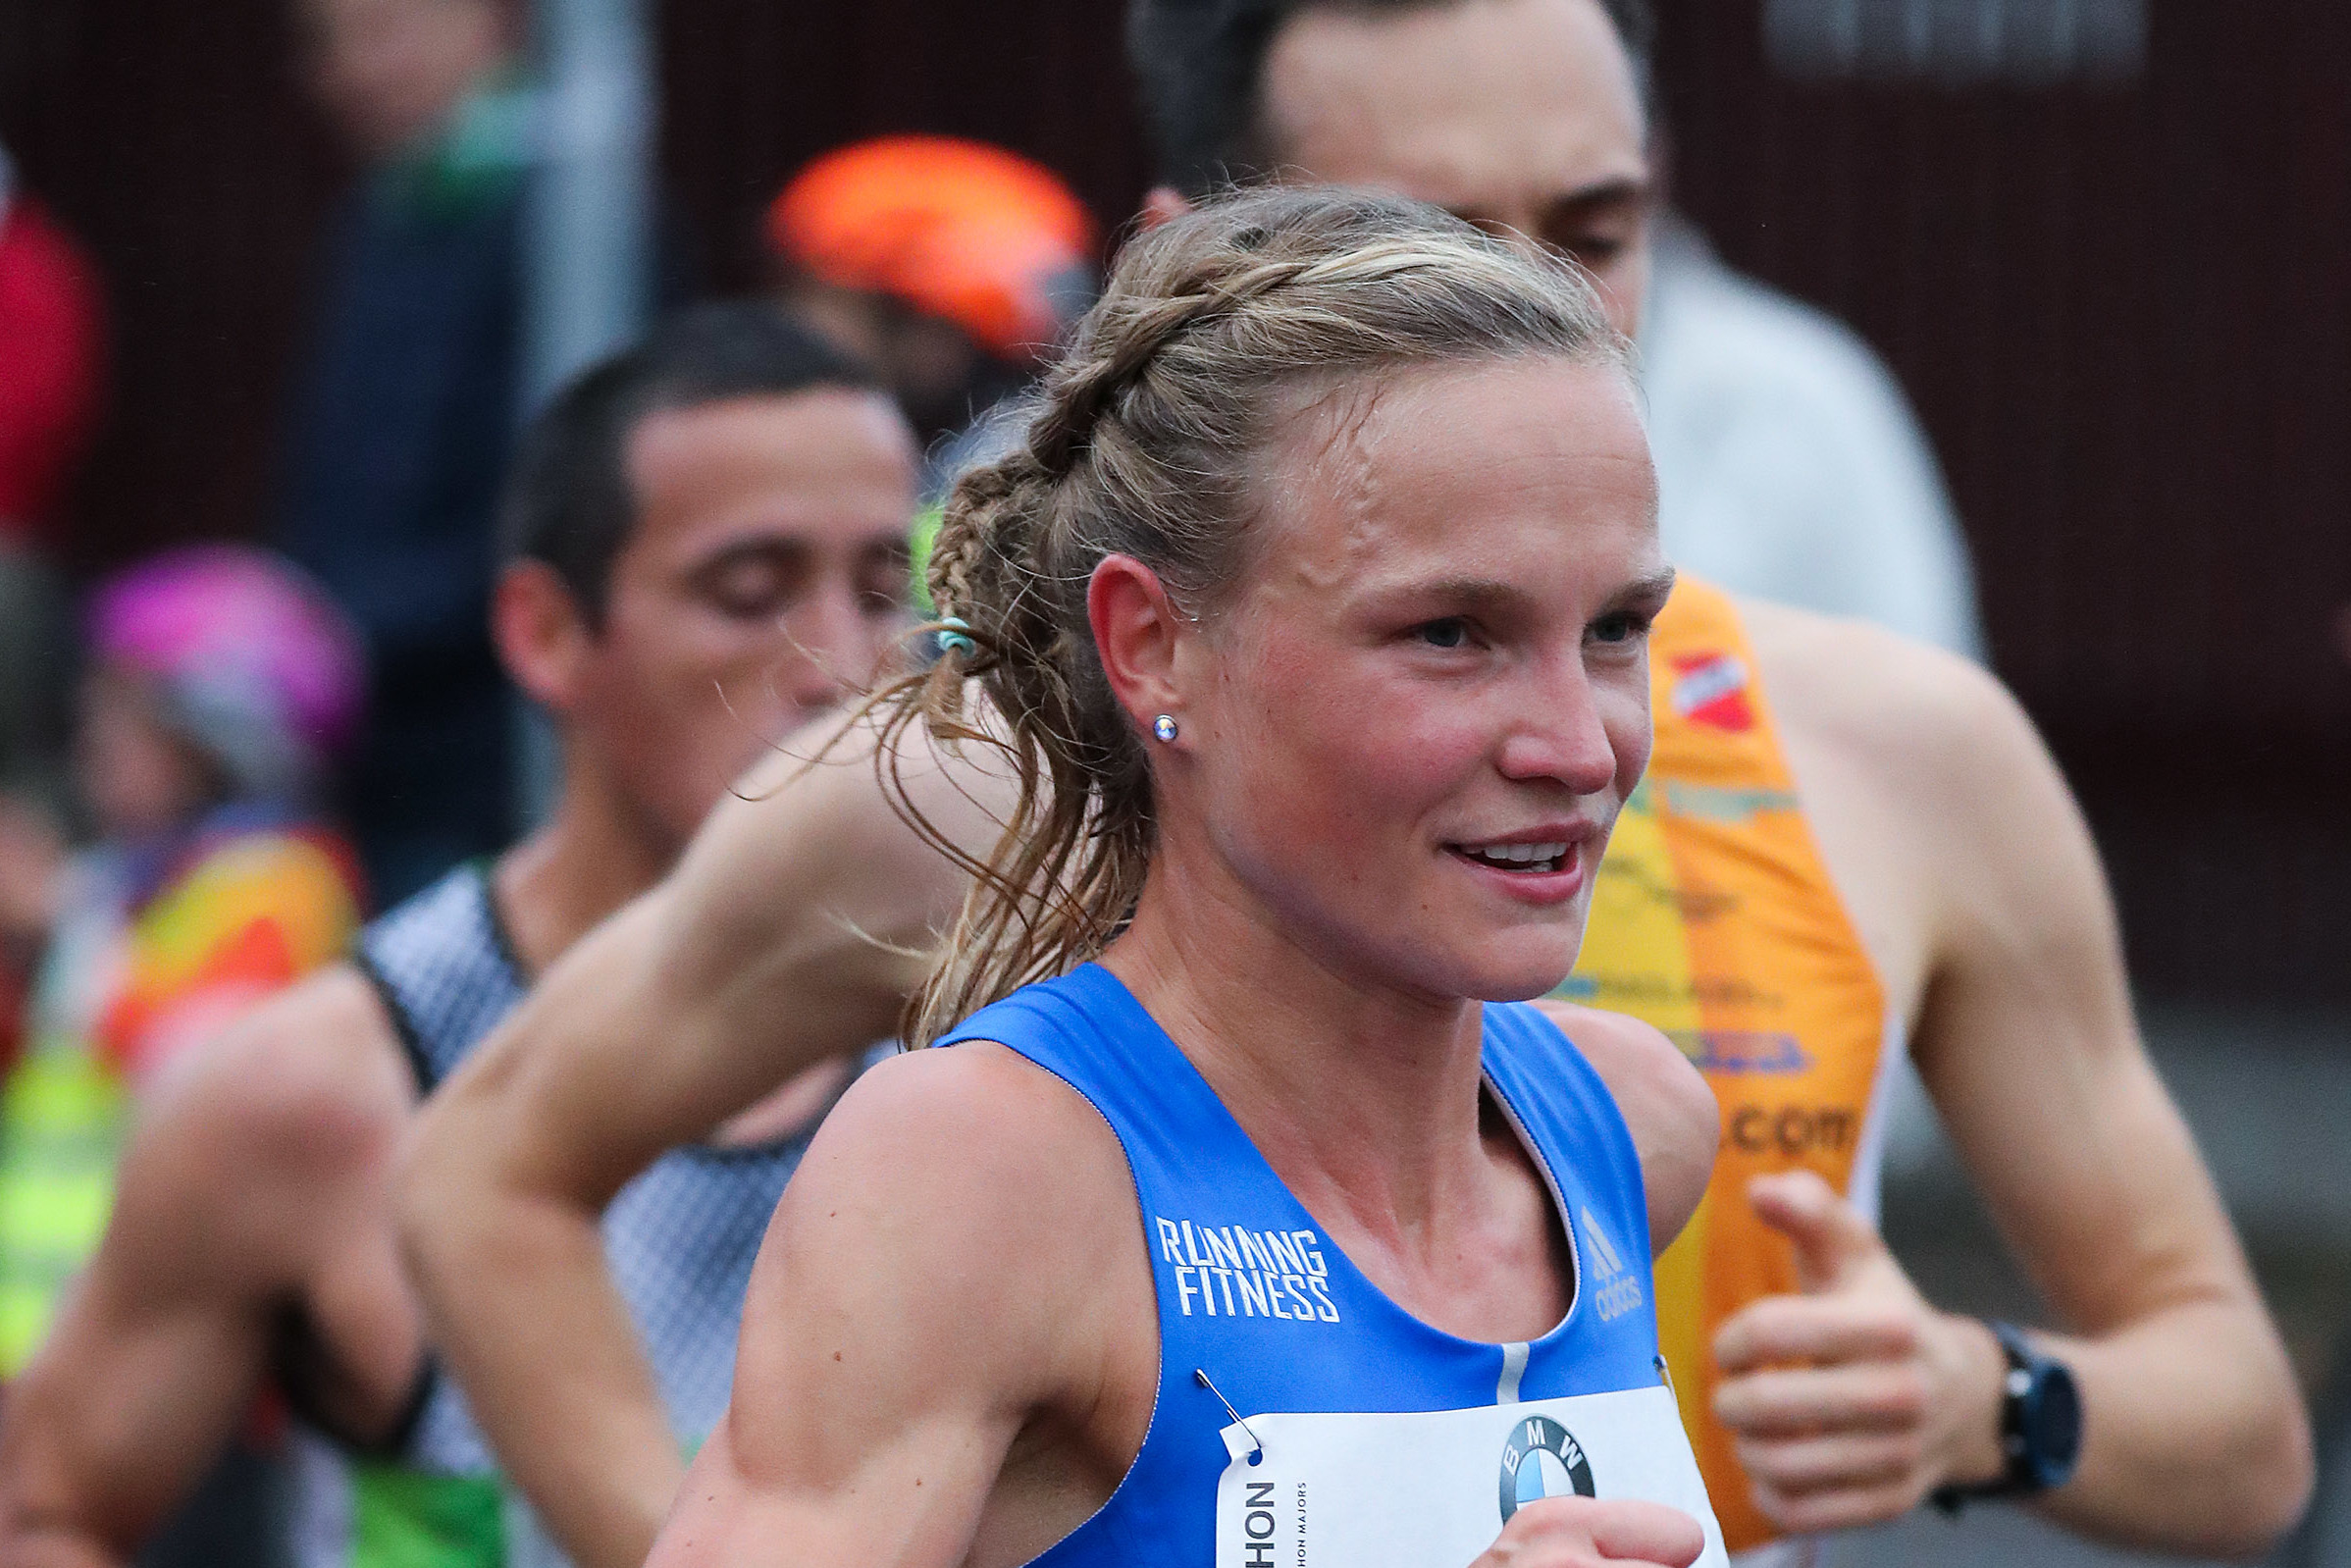 Anna Hahner (SCC EVENTS PRO TEAM) will toe the starting line in Berlin for the 5th time